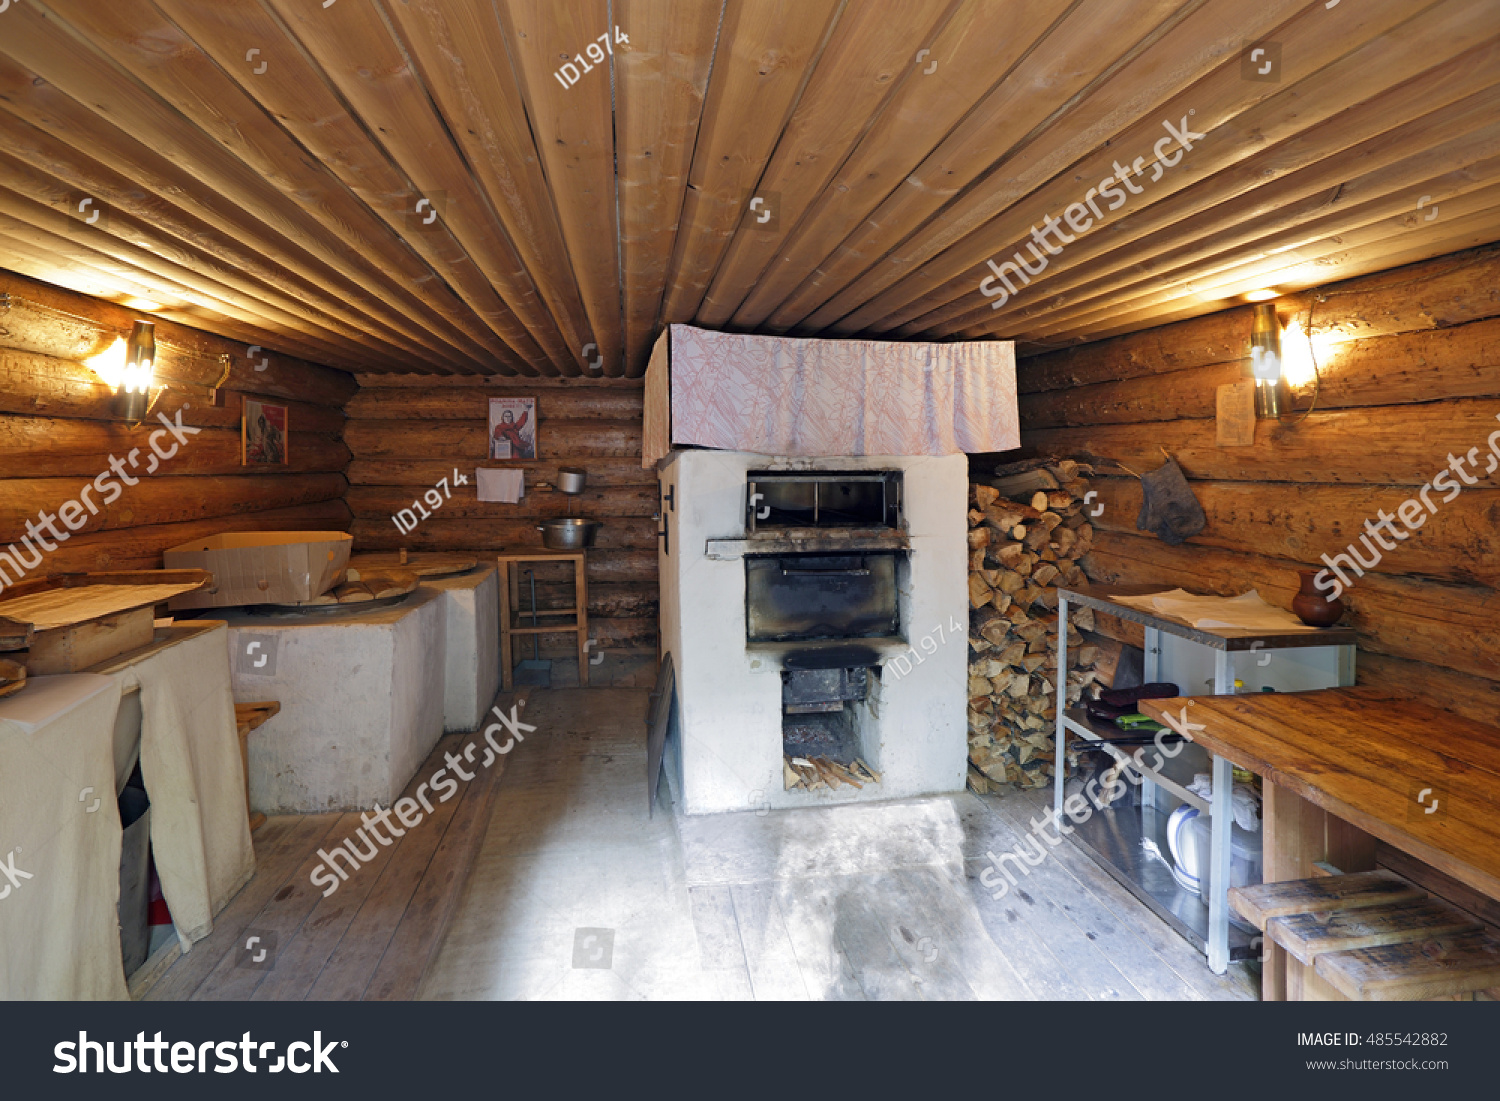 KUBINKA, MOSCOW OBLAST, RUSSIA - JUL 04, 2016: Military-patriotic park "Patriot". Reconstruction of a partisan village of the WWII - Bakery (dugout) #485542882